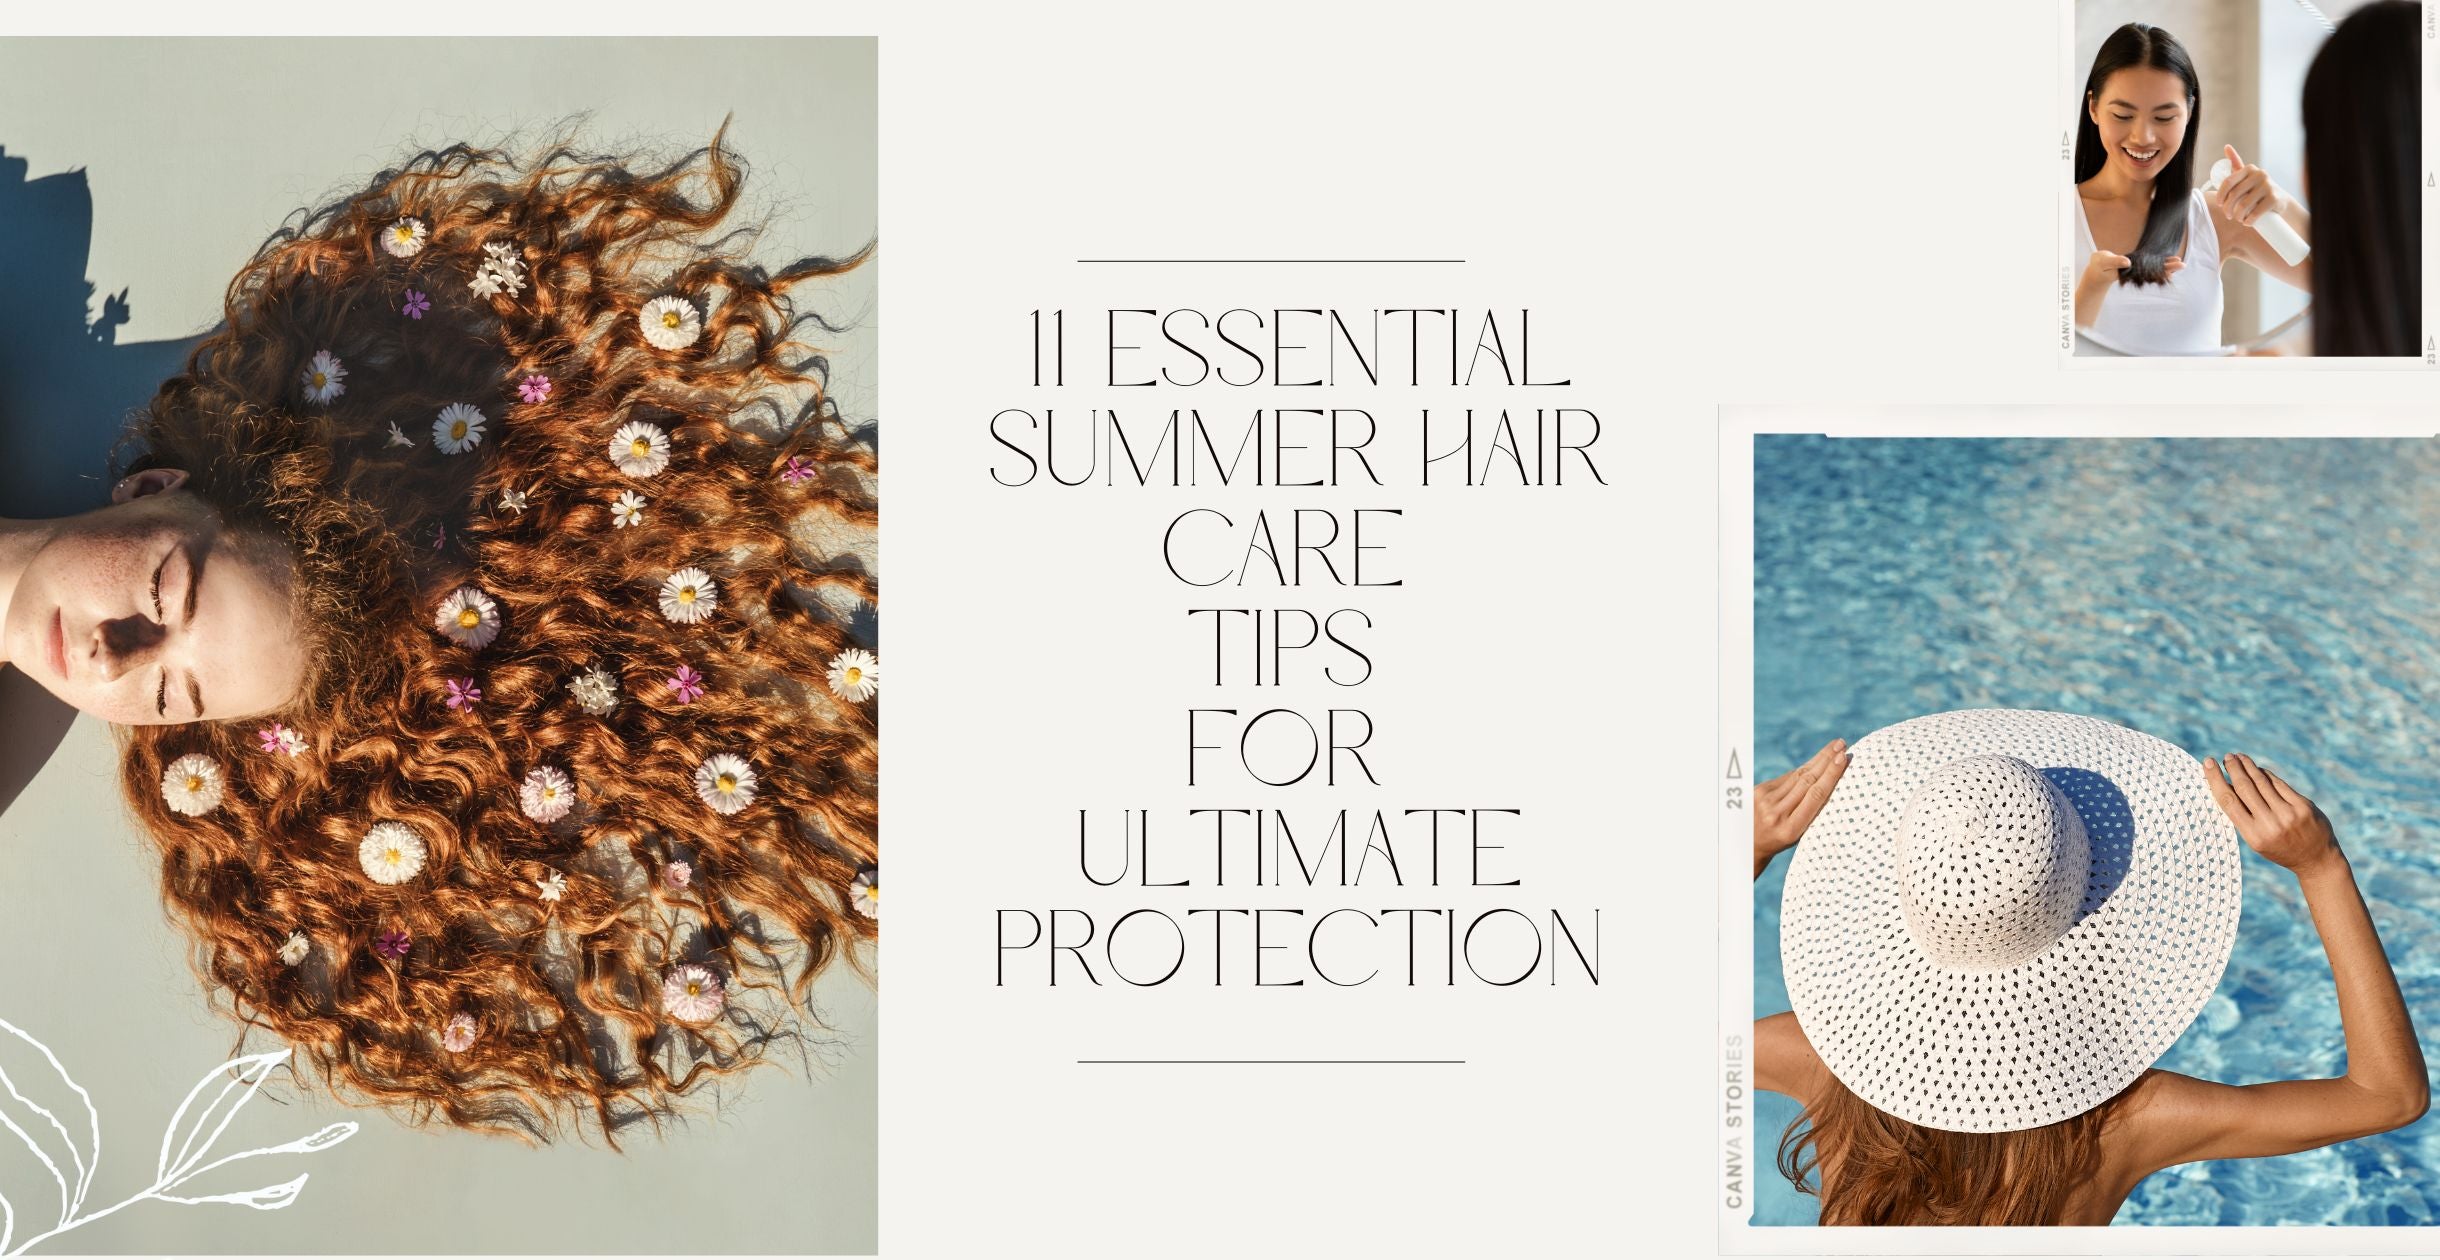 11 Essential Summer Hair Care Tips for Ultimate Protection